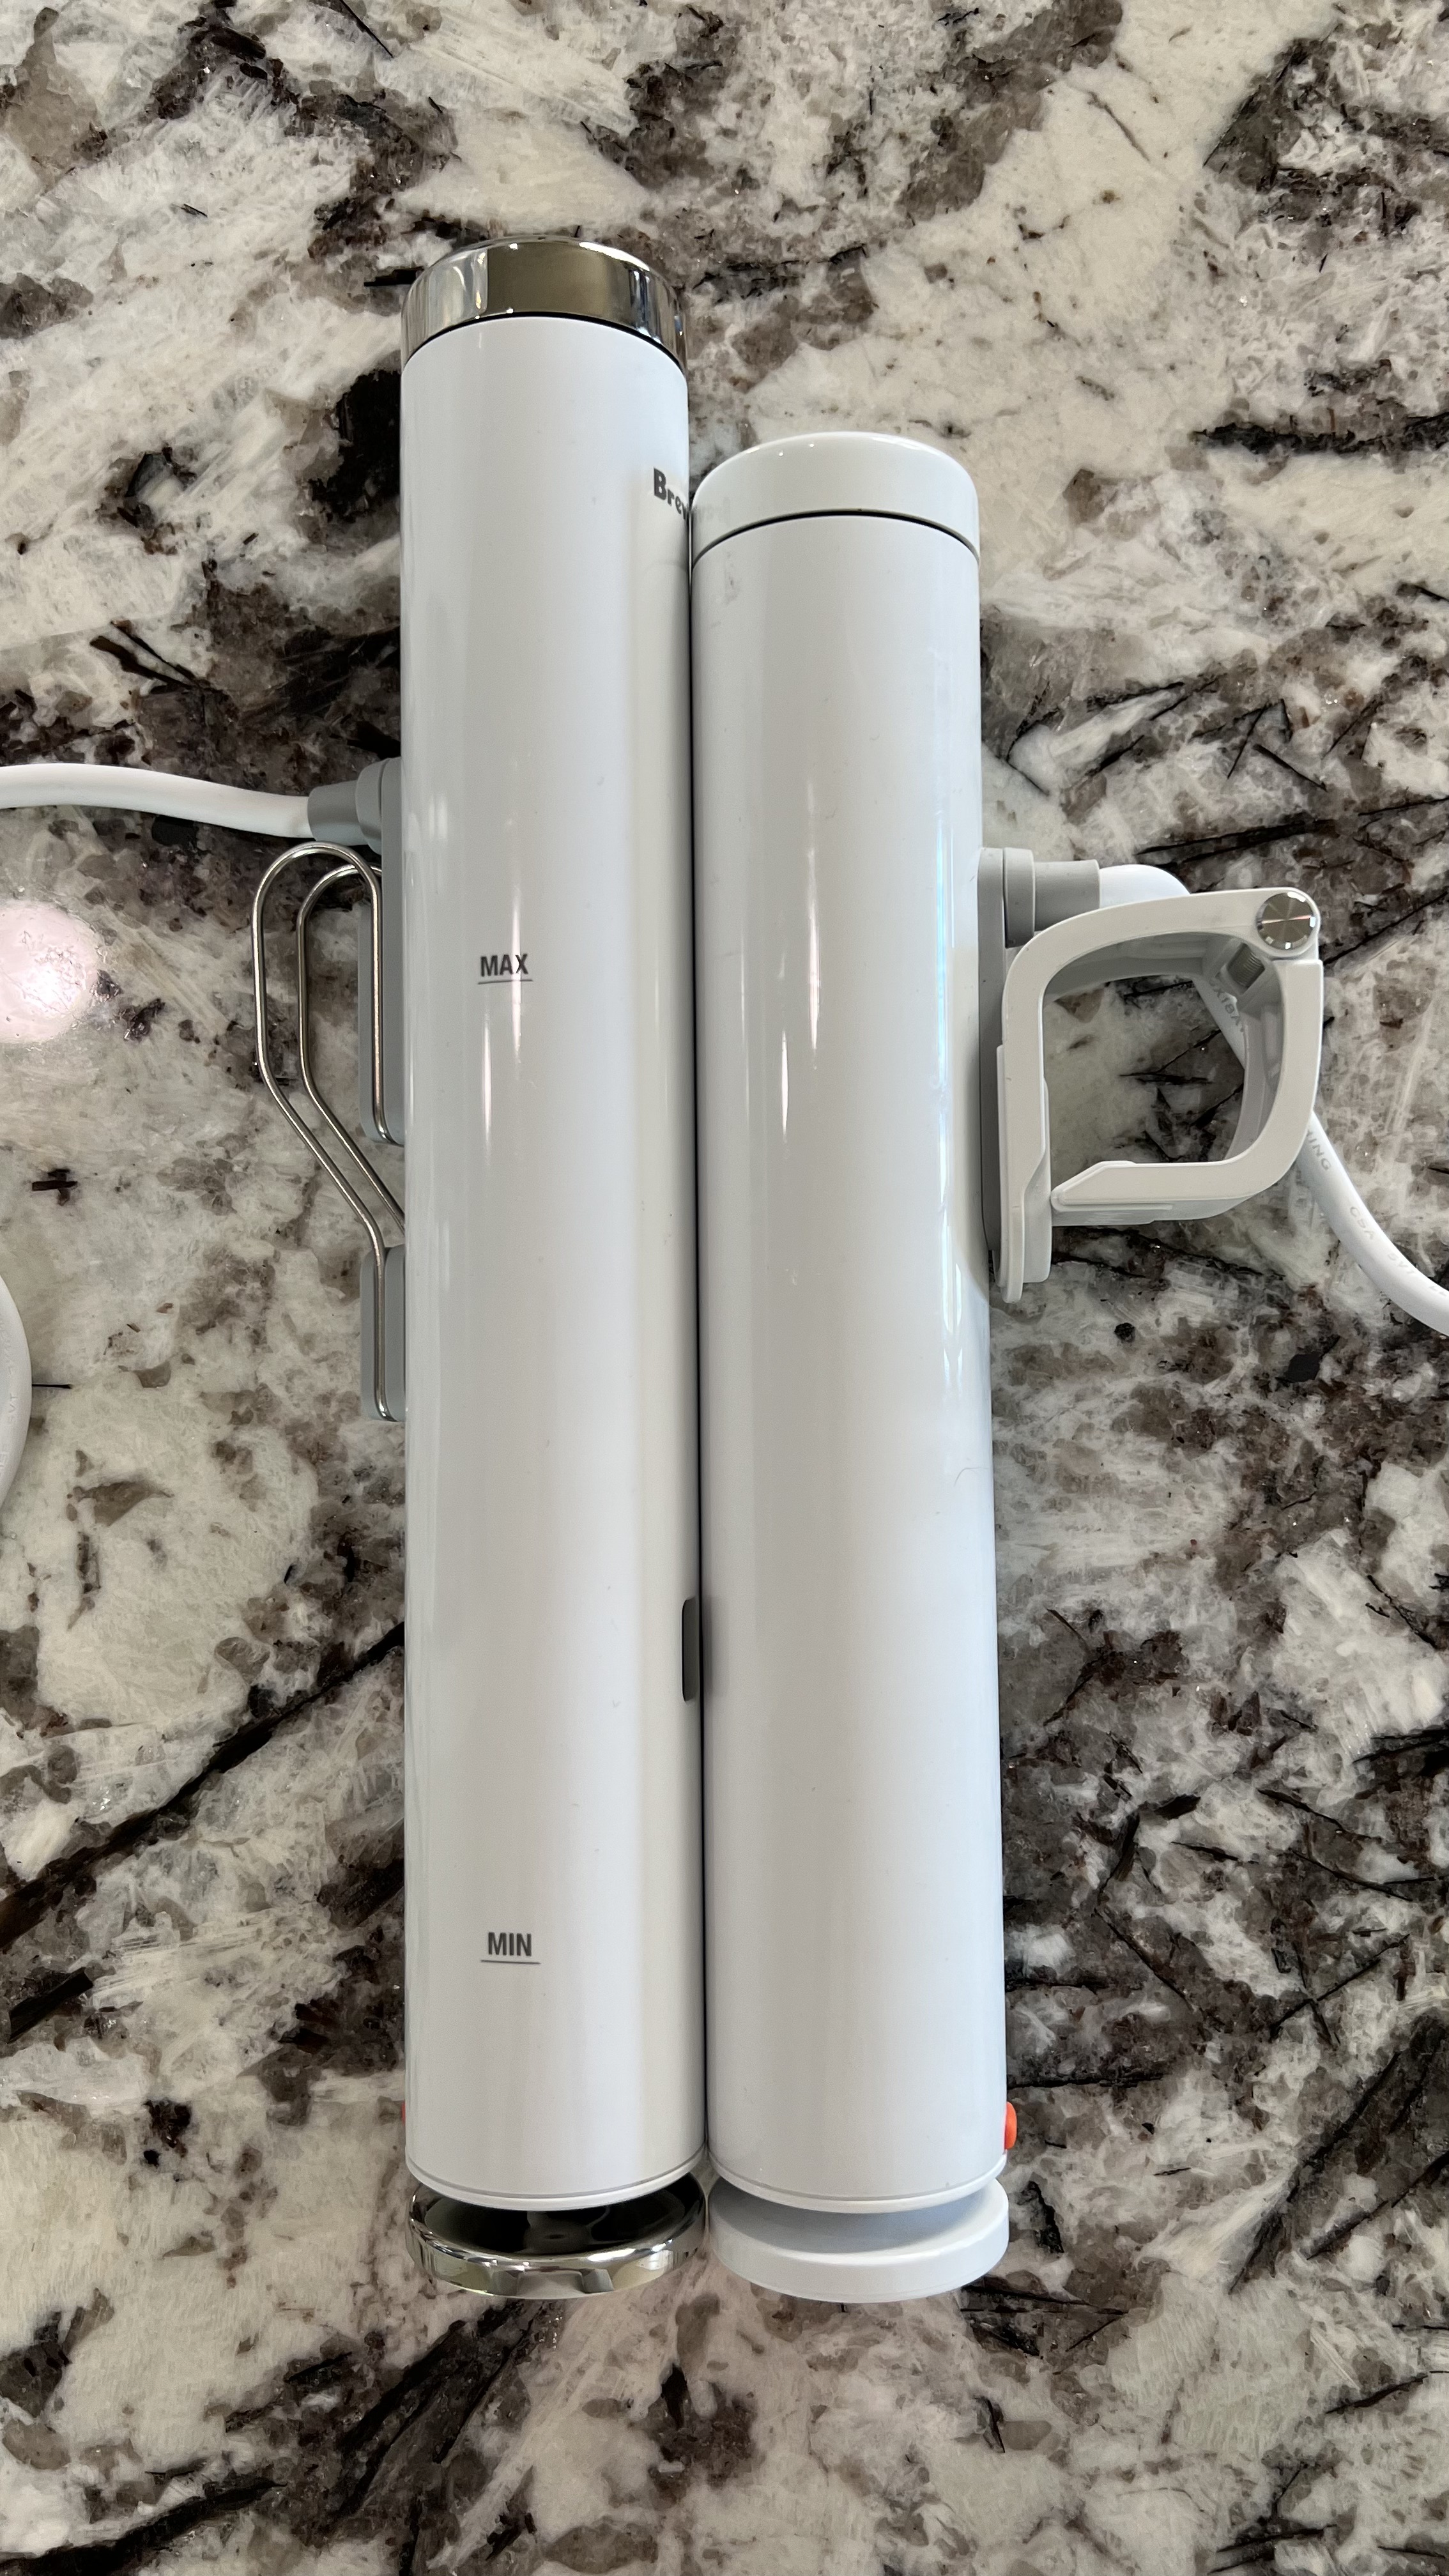 Breville Joule Turbo review: sous vide with speed - The Verge